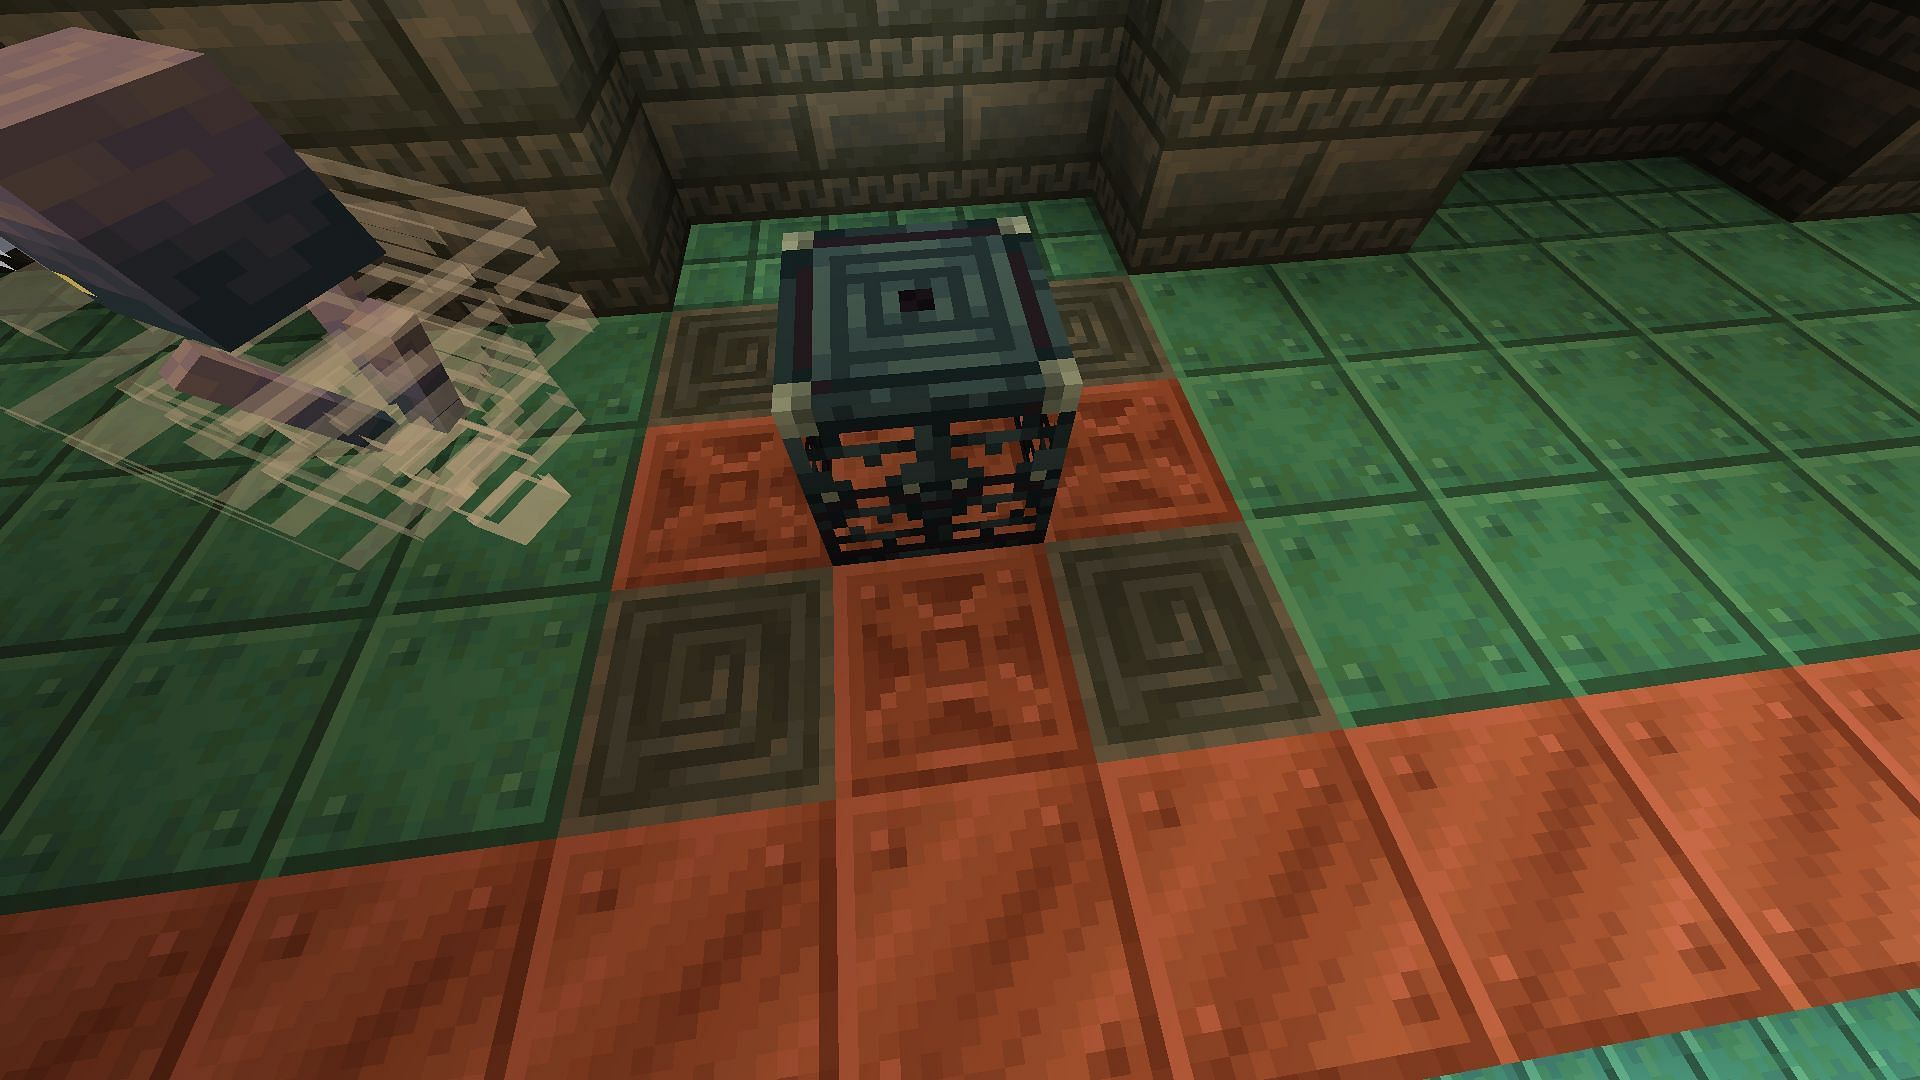 Breeze mob only spawns from trial spawners surrounded by chiseled tuff blocks in Minecraft (Image via Mojang)